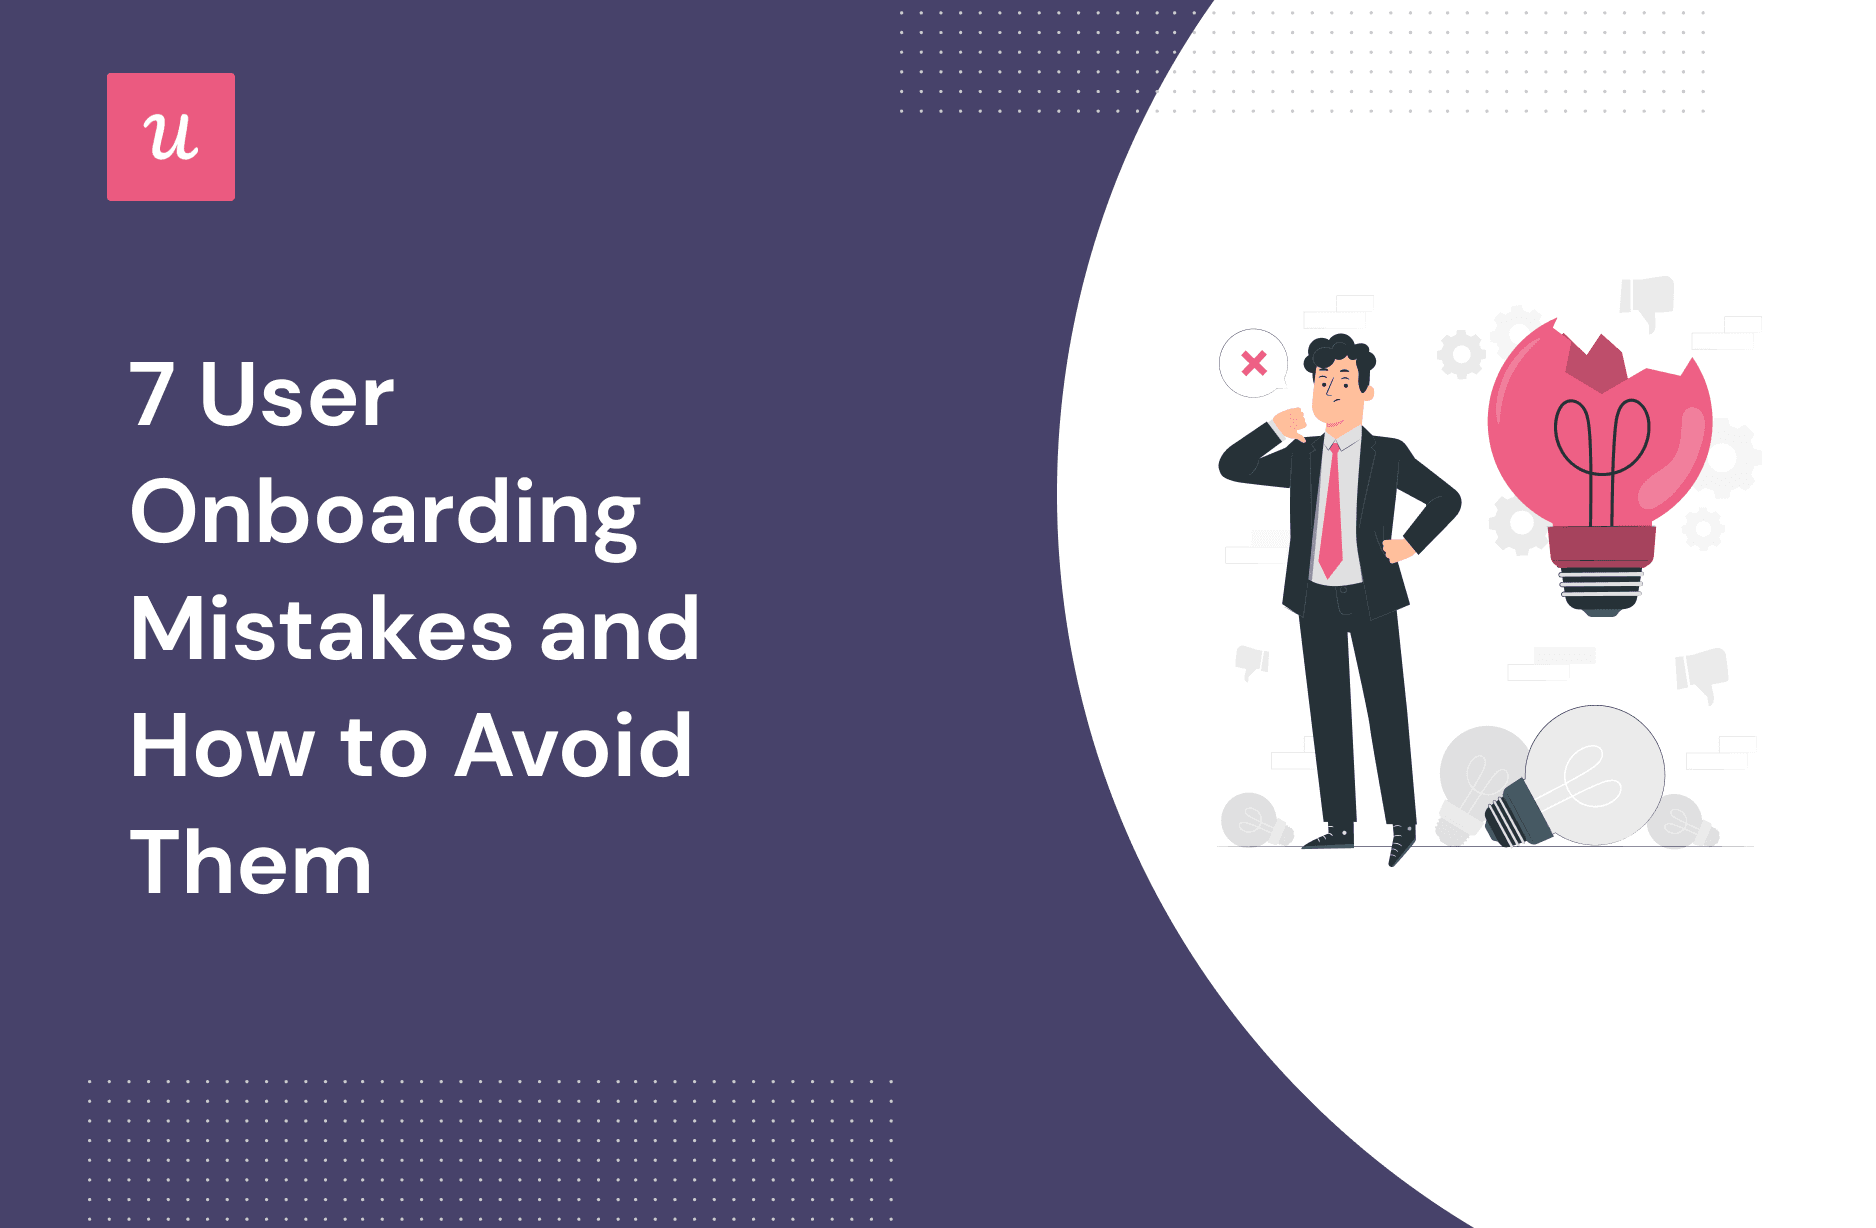 7 User Onboarding Mistakes and How to Avoid Them cover